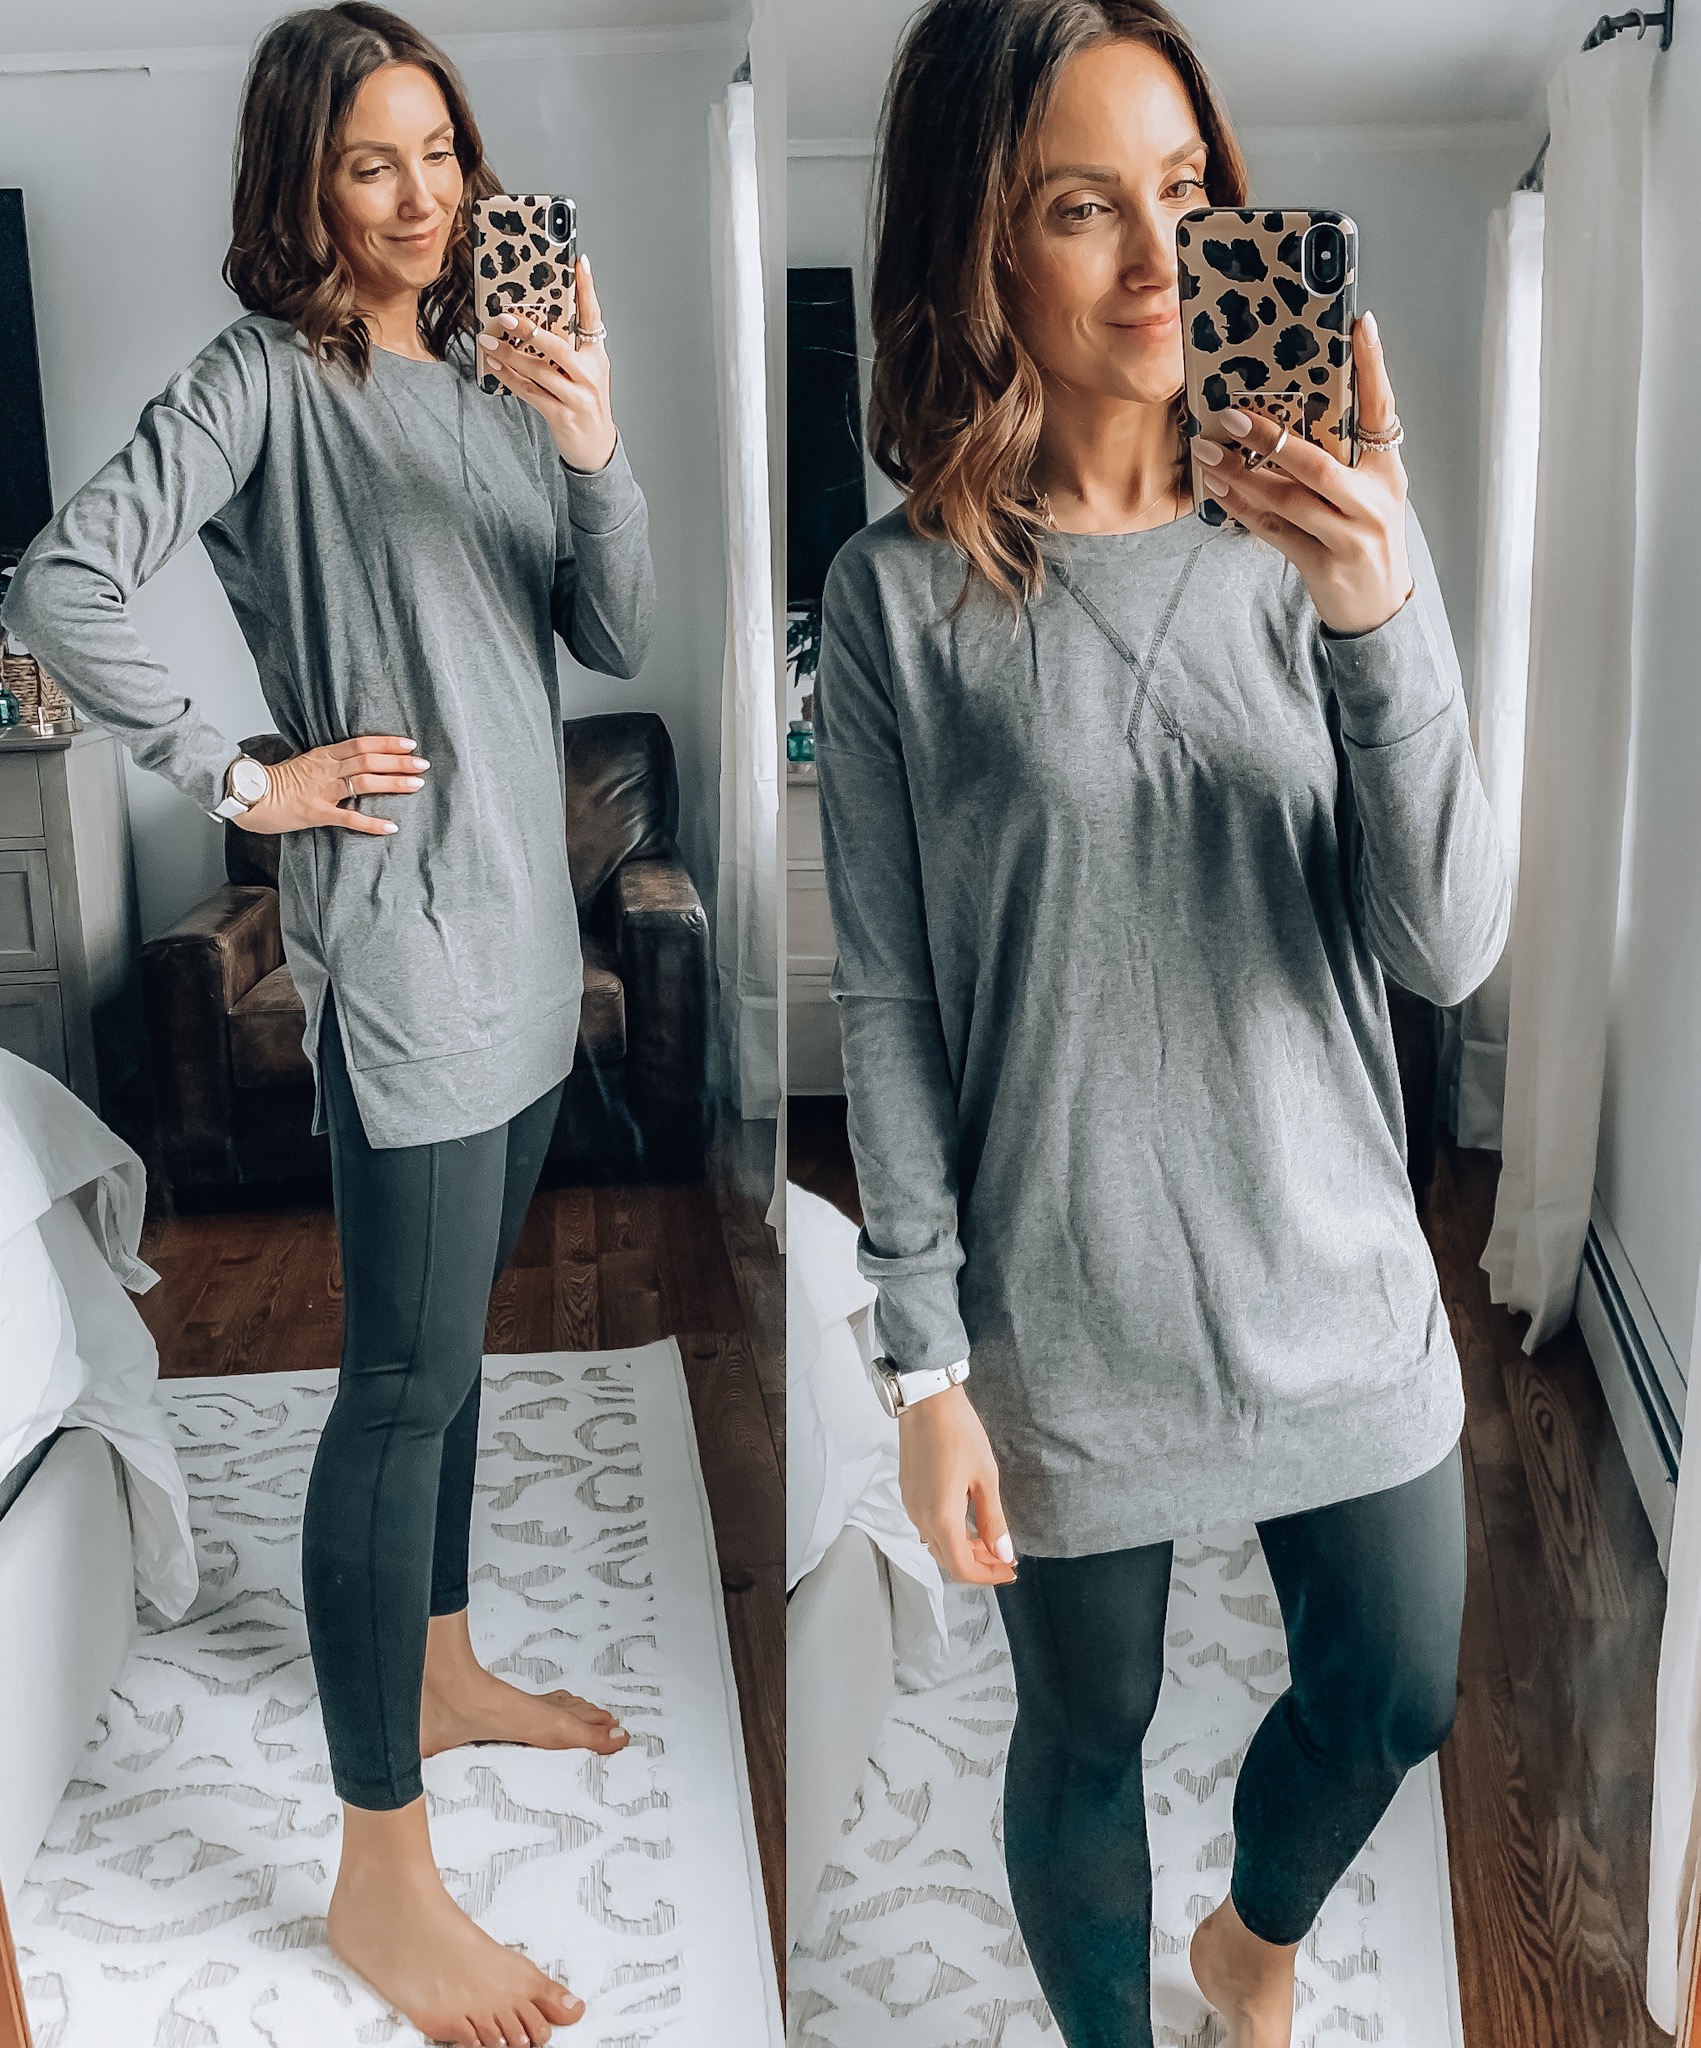 woman wearing athleisure style